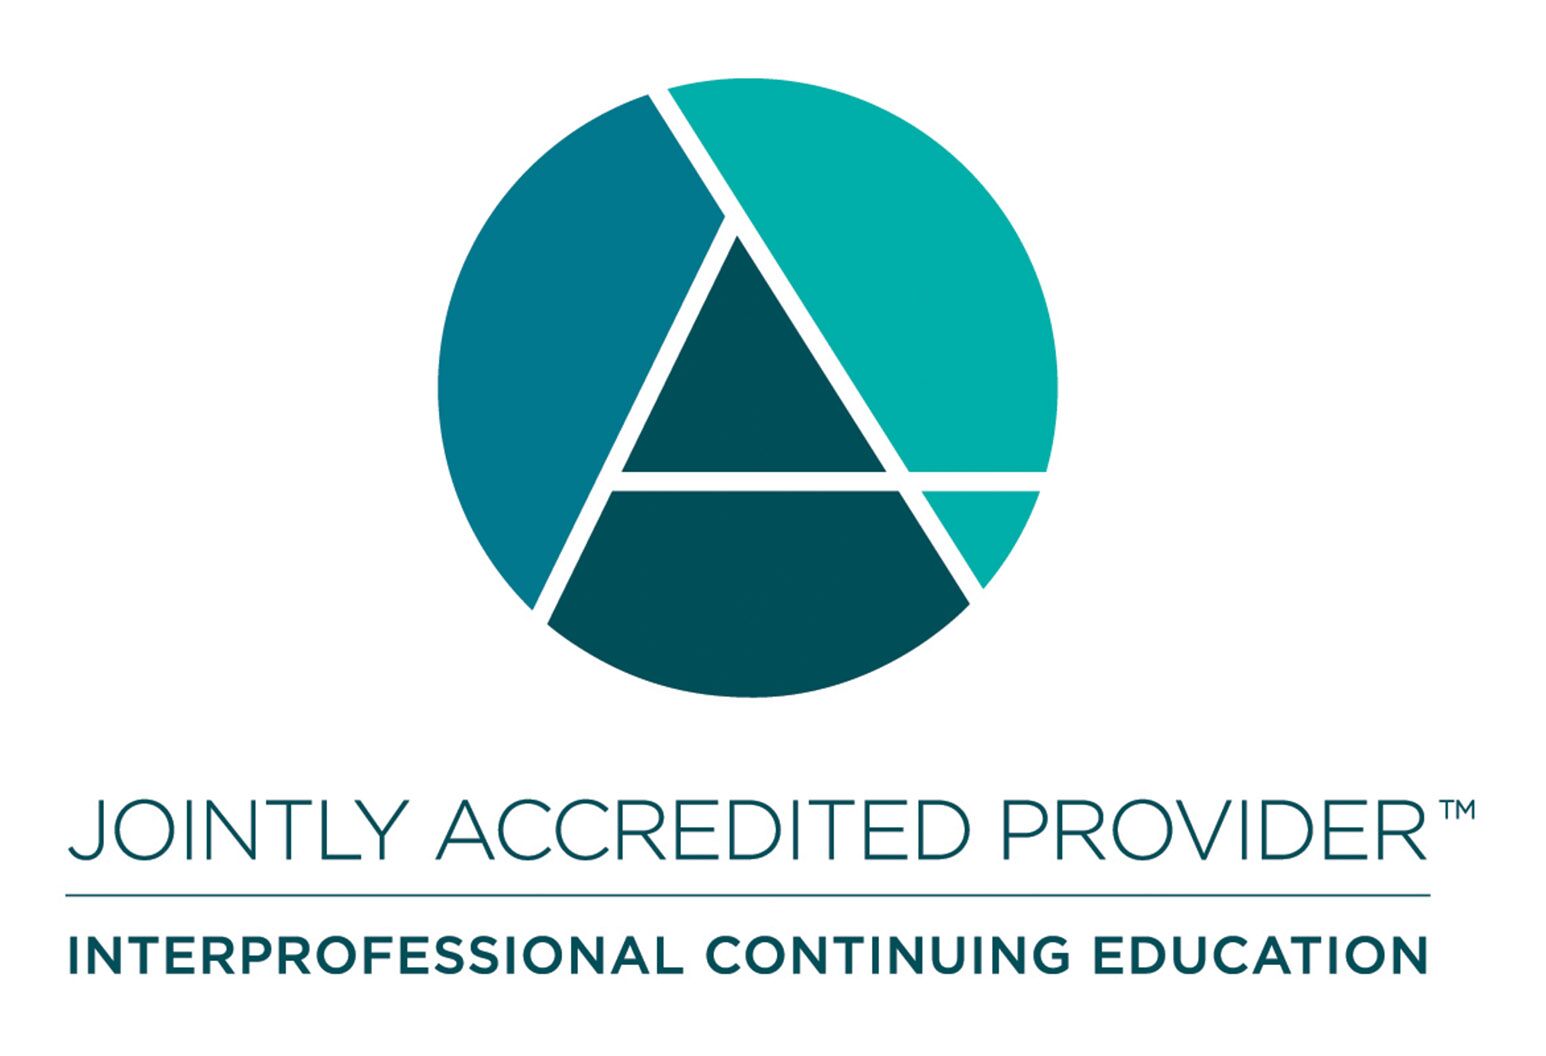 Jointy Accredited Provider Logo. Interprofessional Continuing Education